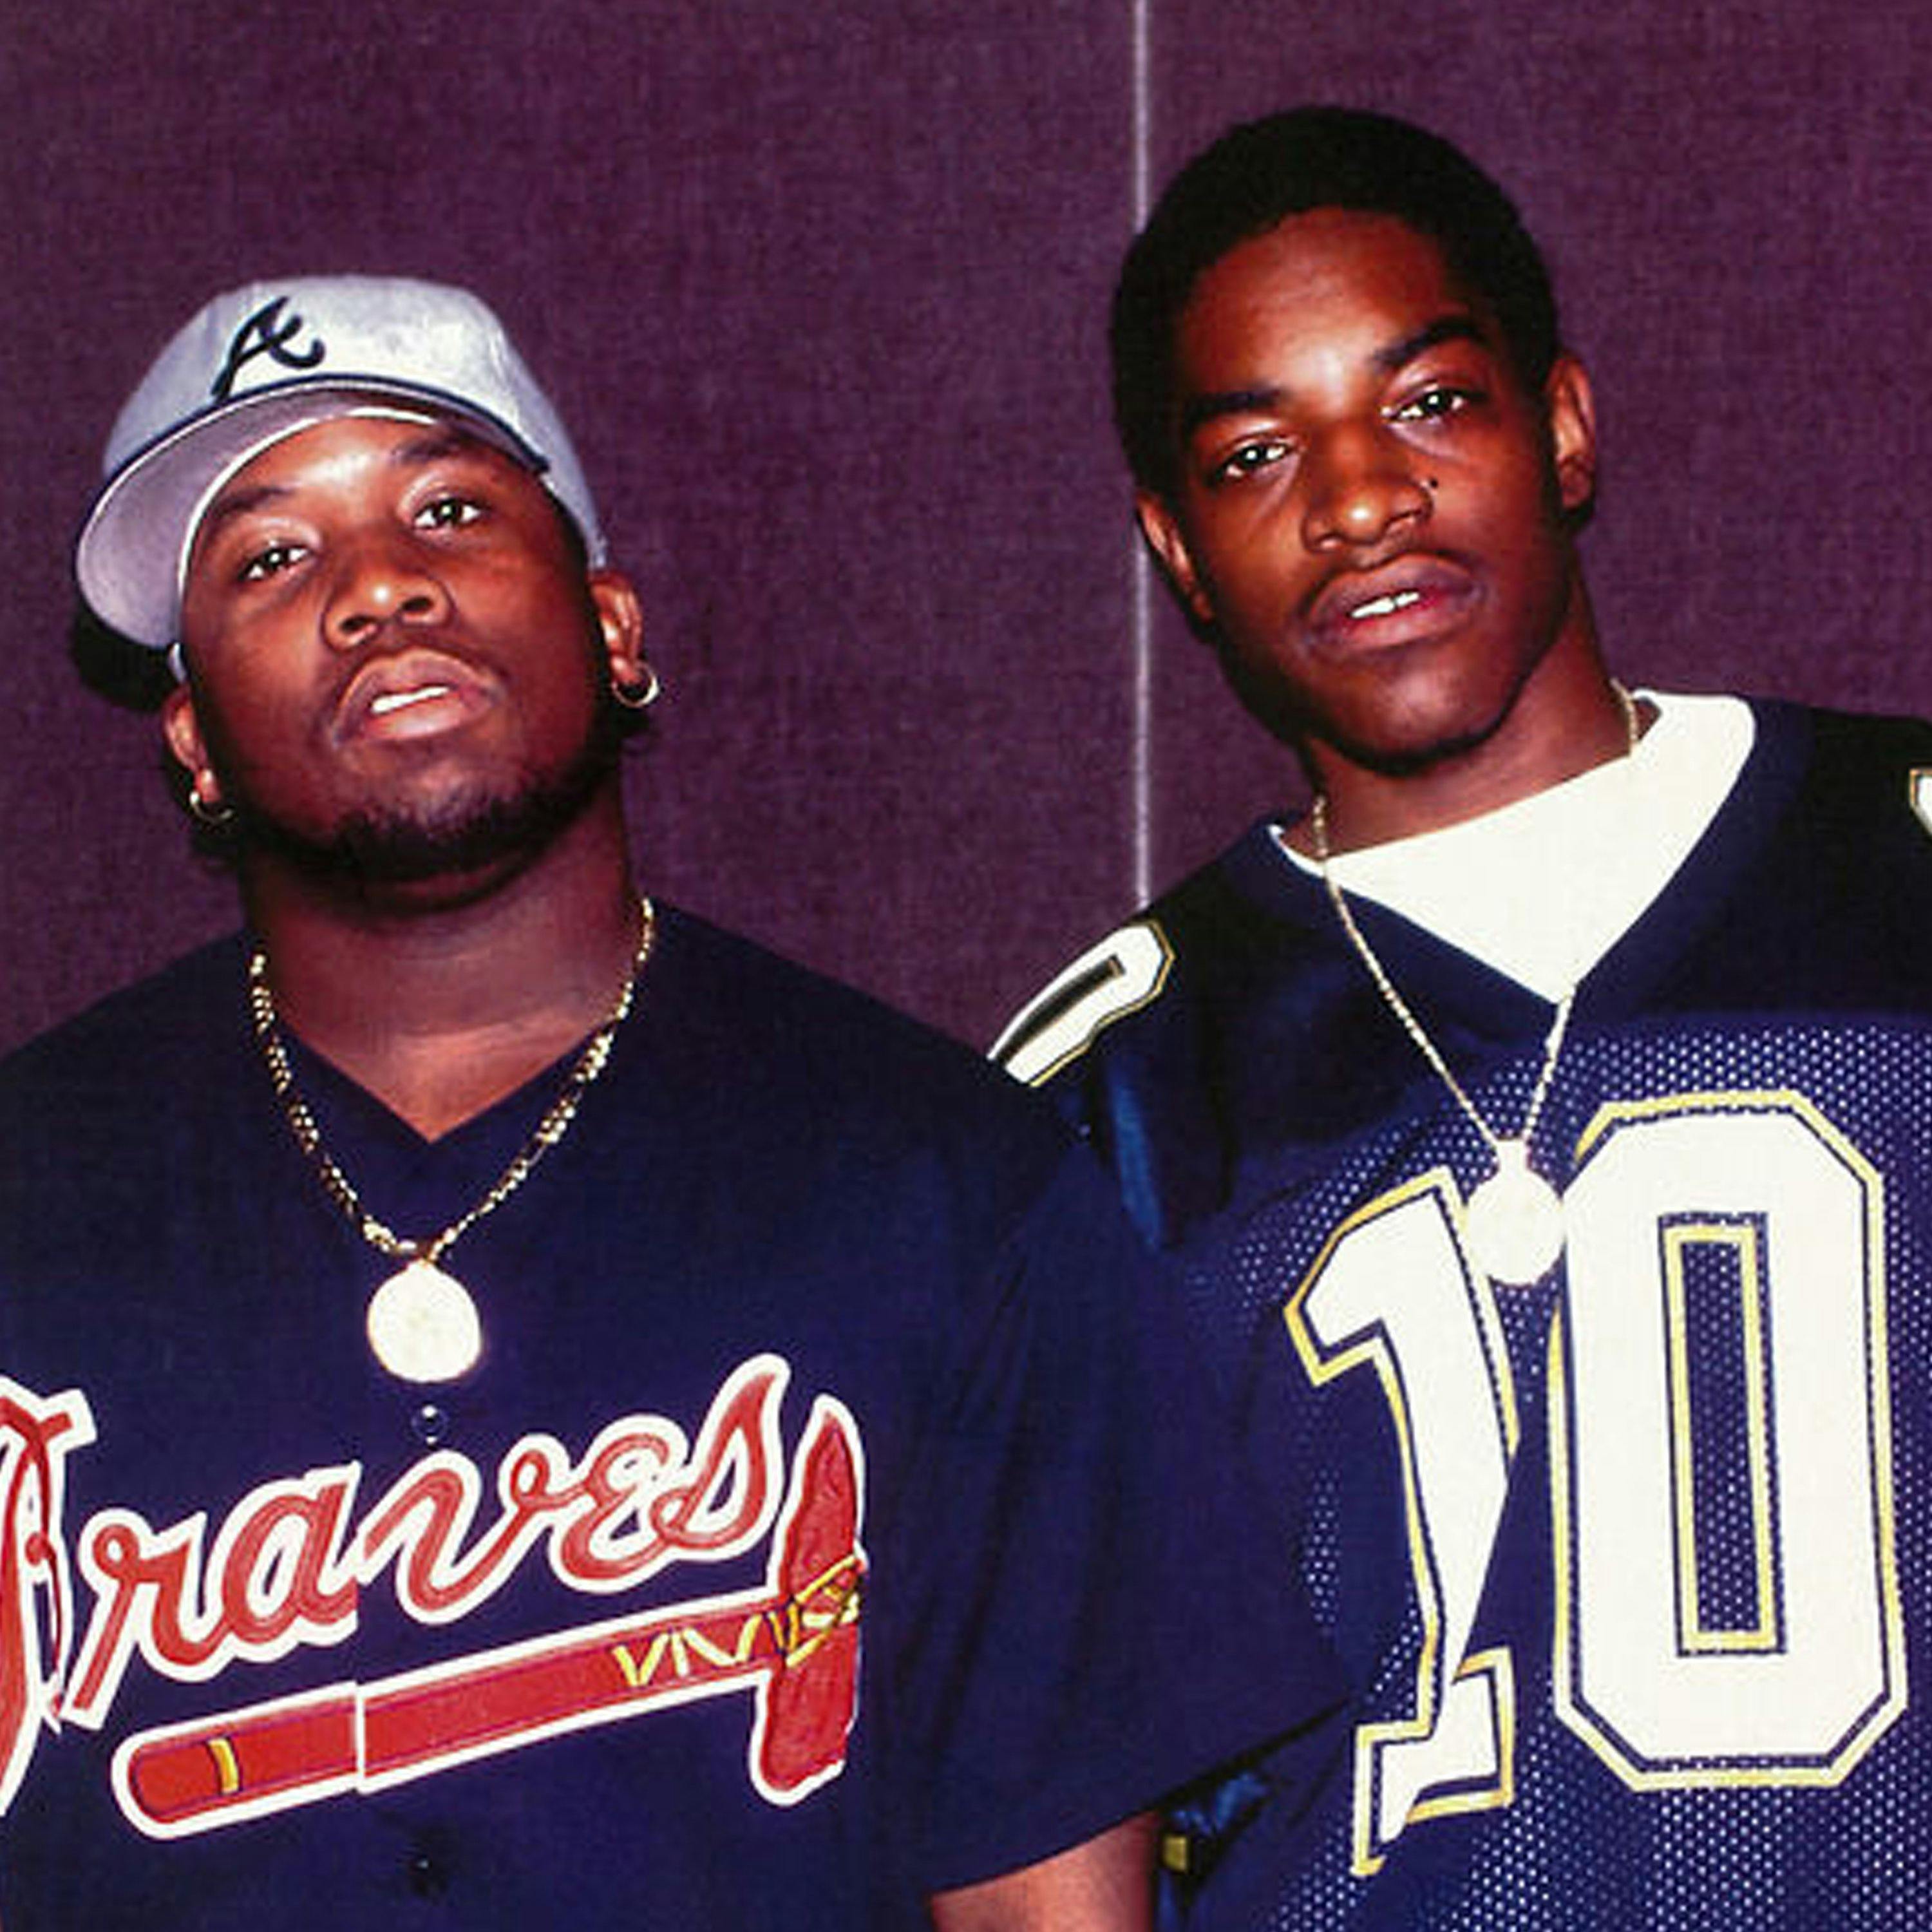 Hey rappers: bring back the jerseys